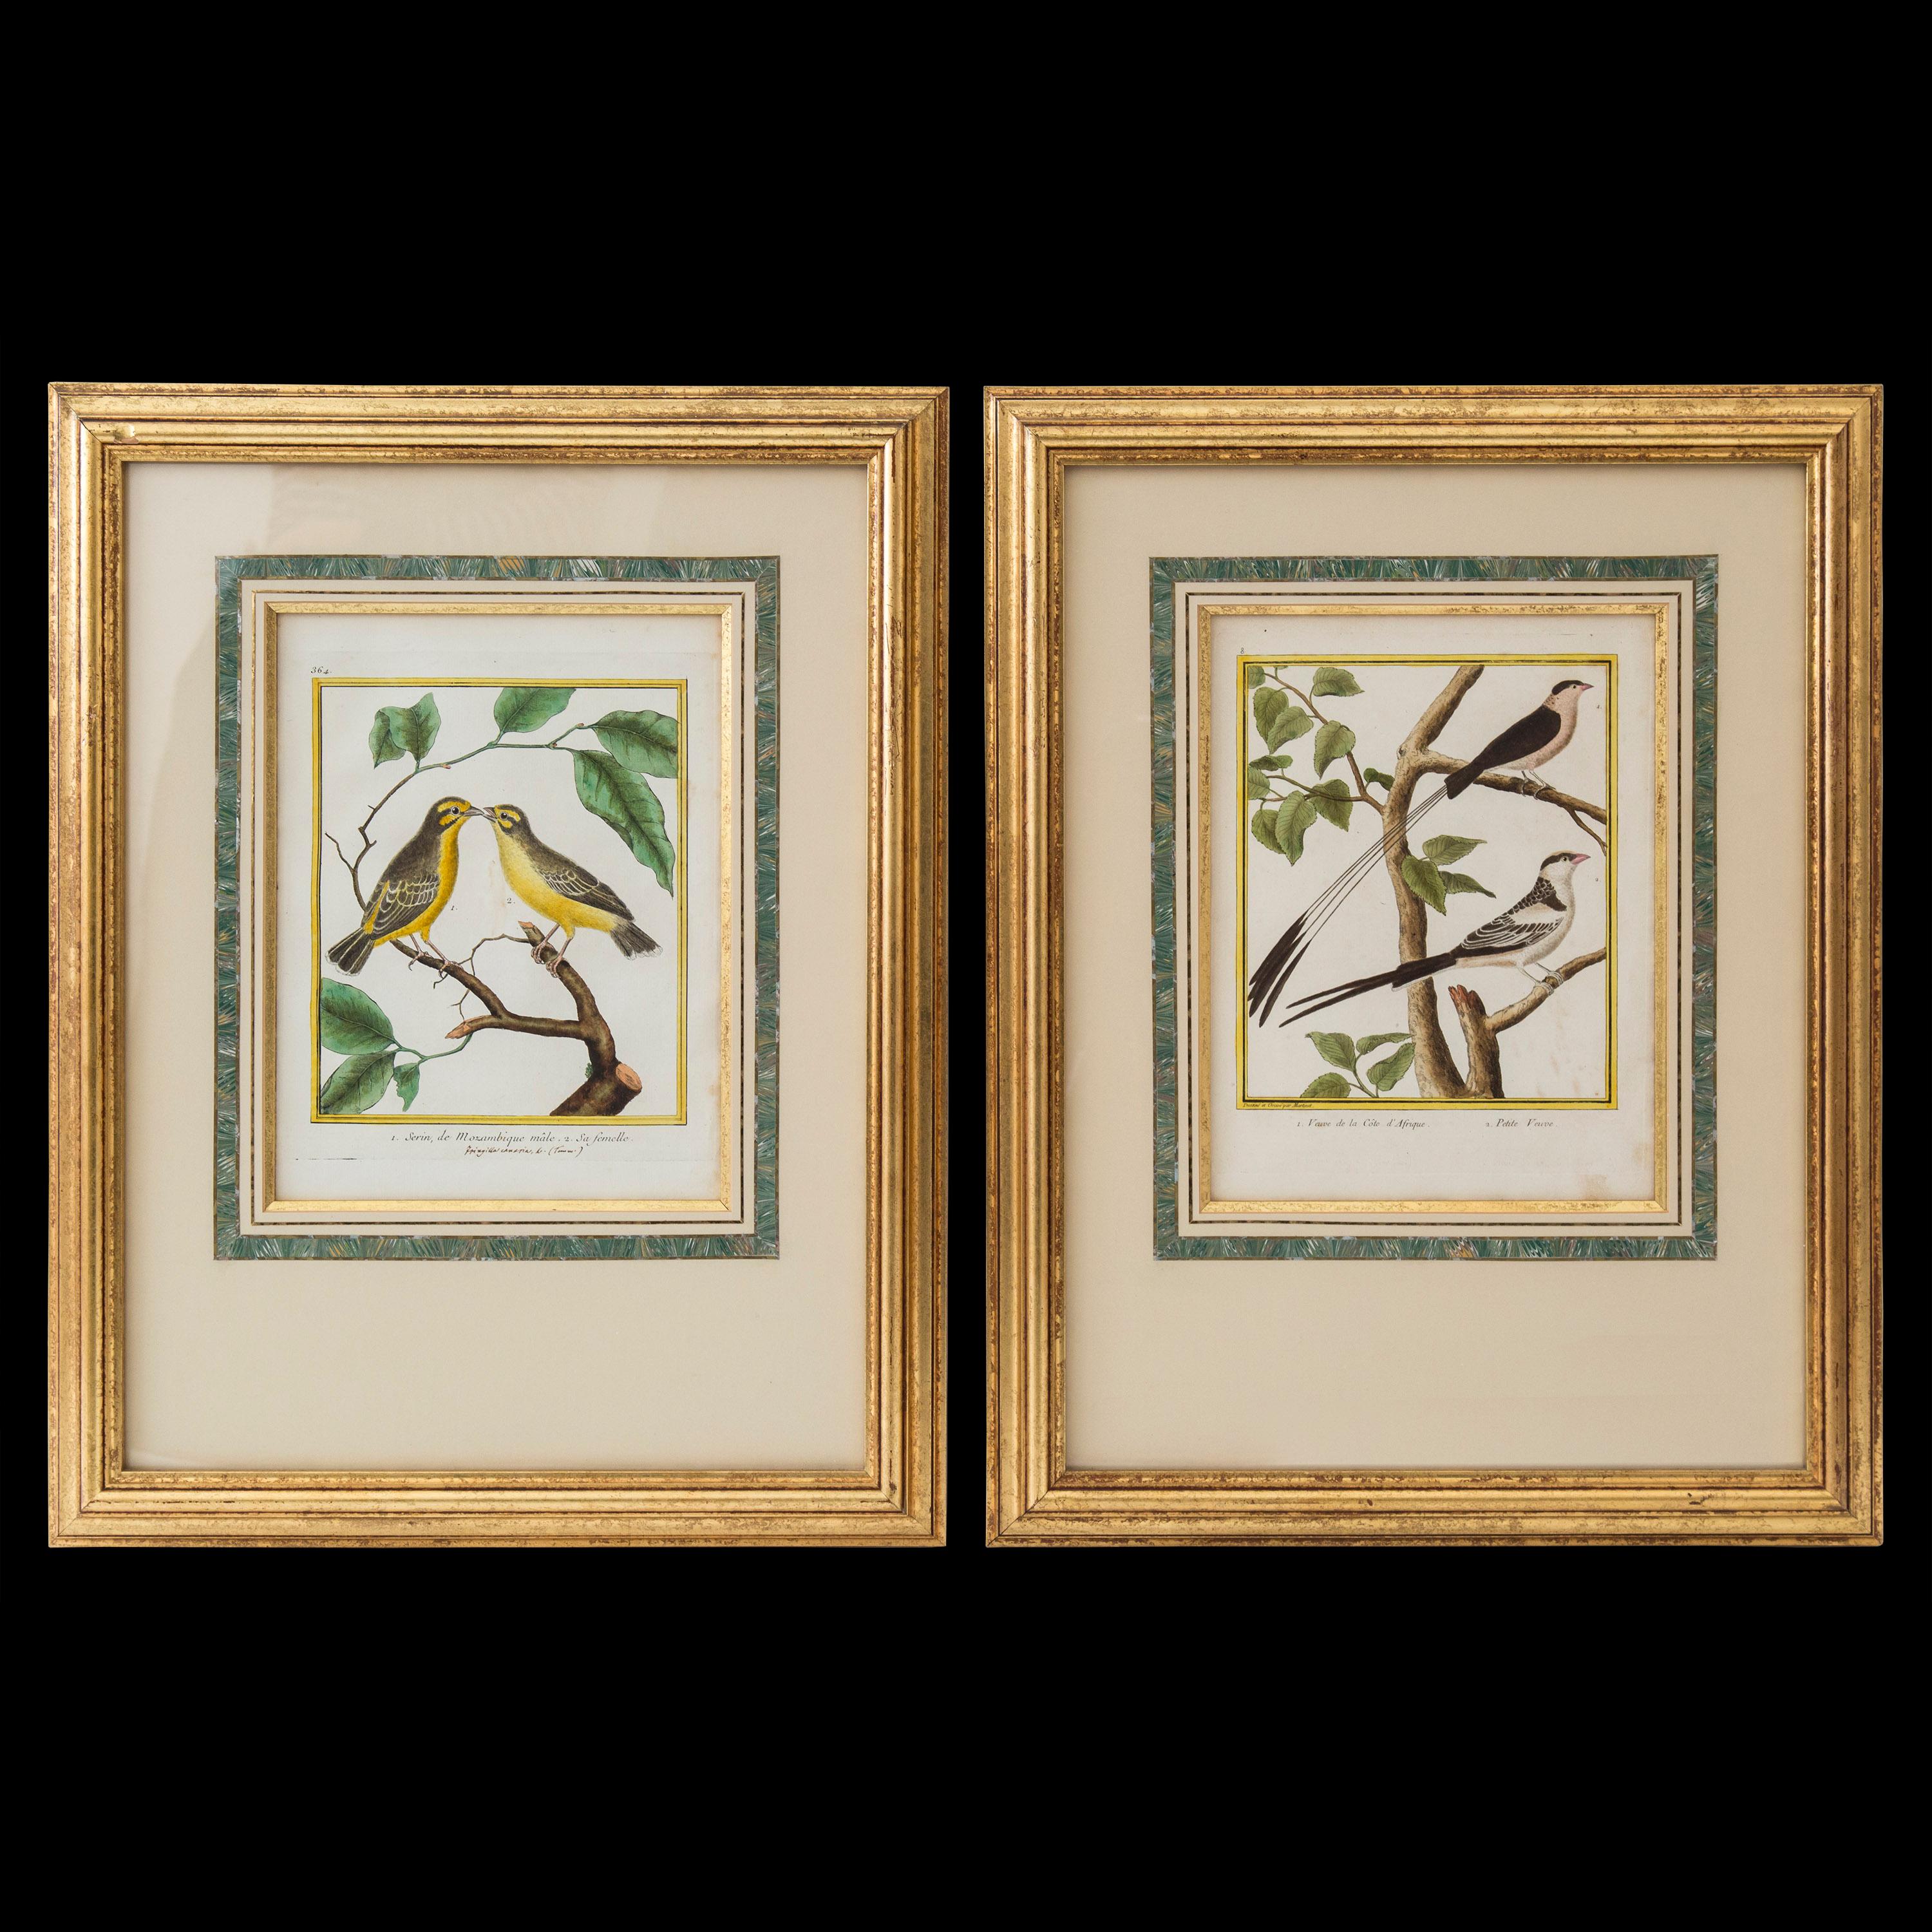 A pair of Engravings of birds by François Nicolas Martinet, from Histoire Naturelle des Oiseaux, 1770-1786.

France, circa 1770.

Original hand-colored copper-plate engravings, each signed in the bottom of the yellow border, framed in French